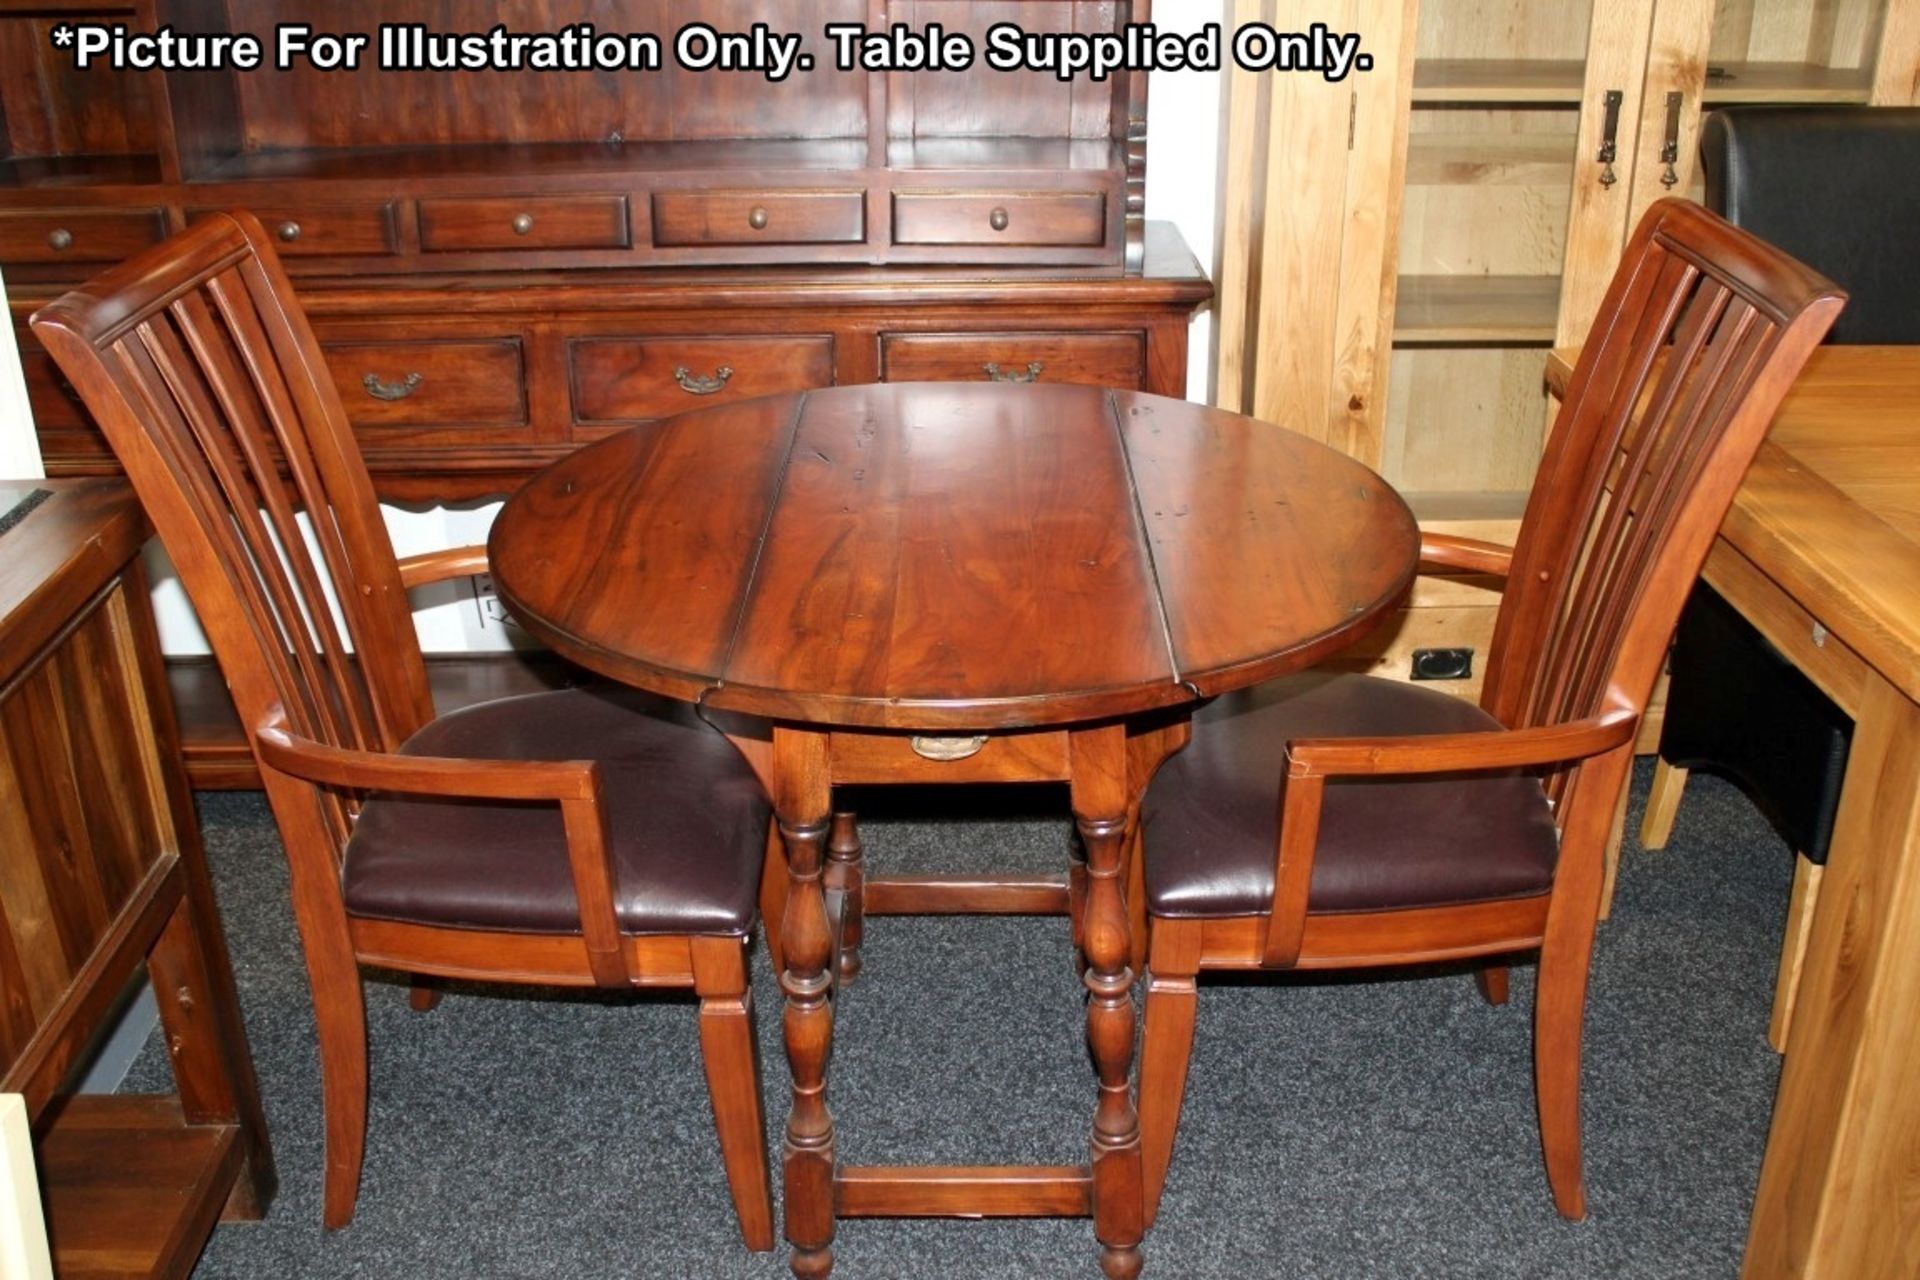 1 x Mark Webster "Burlington" Solid Wood Gate Leg Extending Table With 2-Drawers + 2-Folds - Diamete - Image 4 of 14